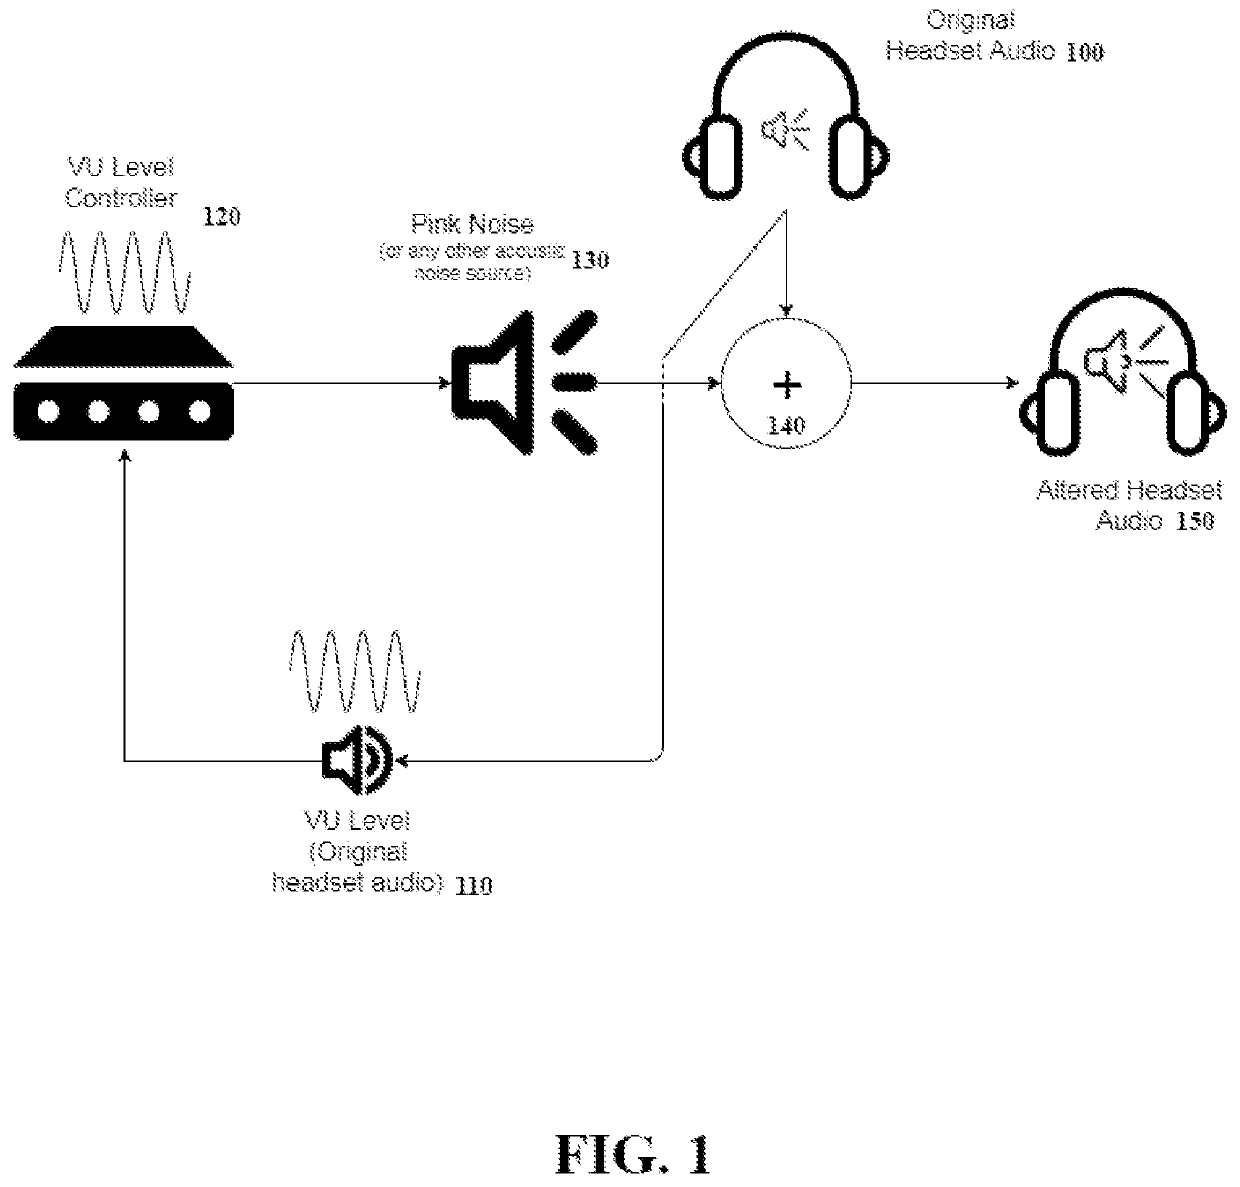 Systems and methods to disrupt phase cancellation effects when using headset devices